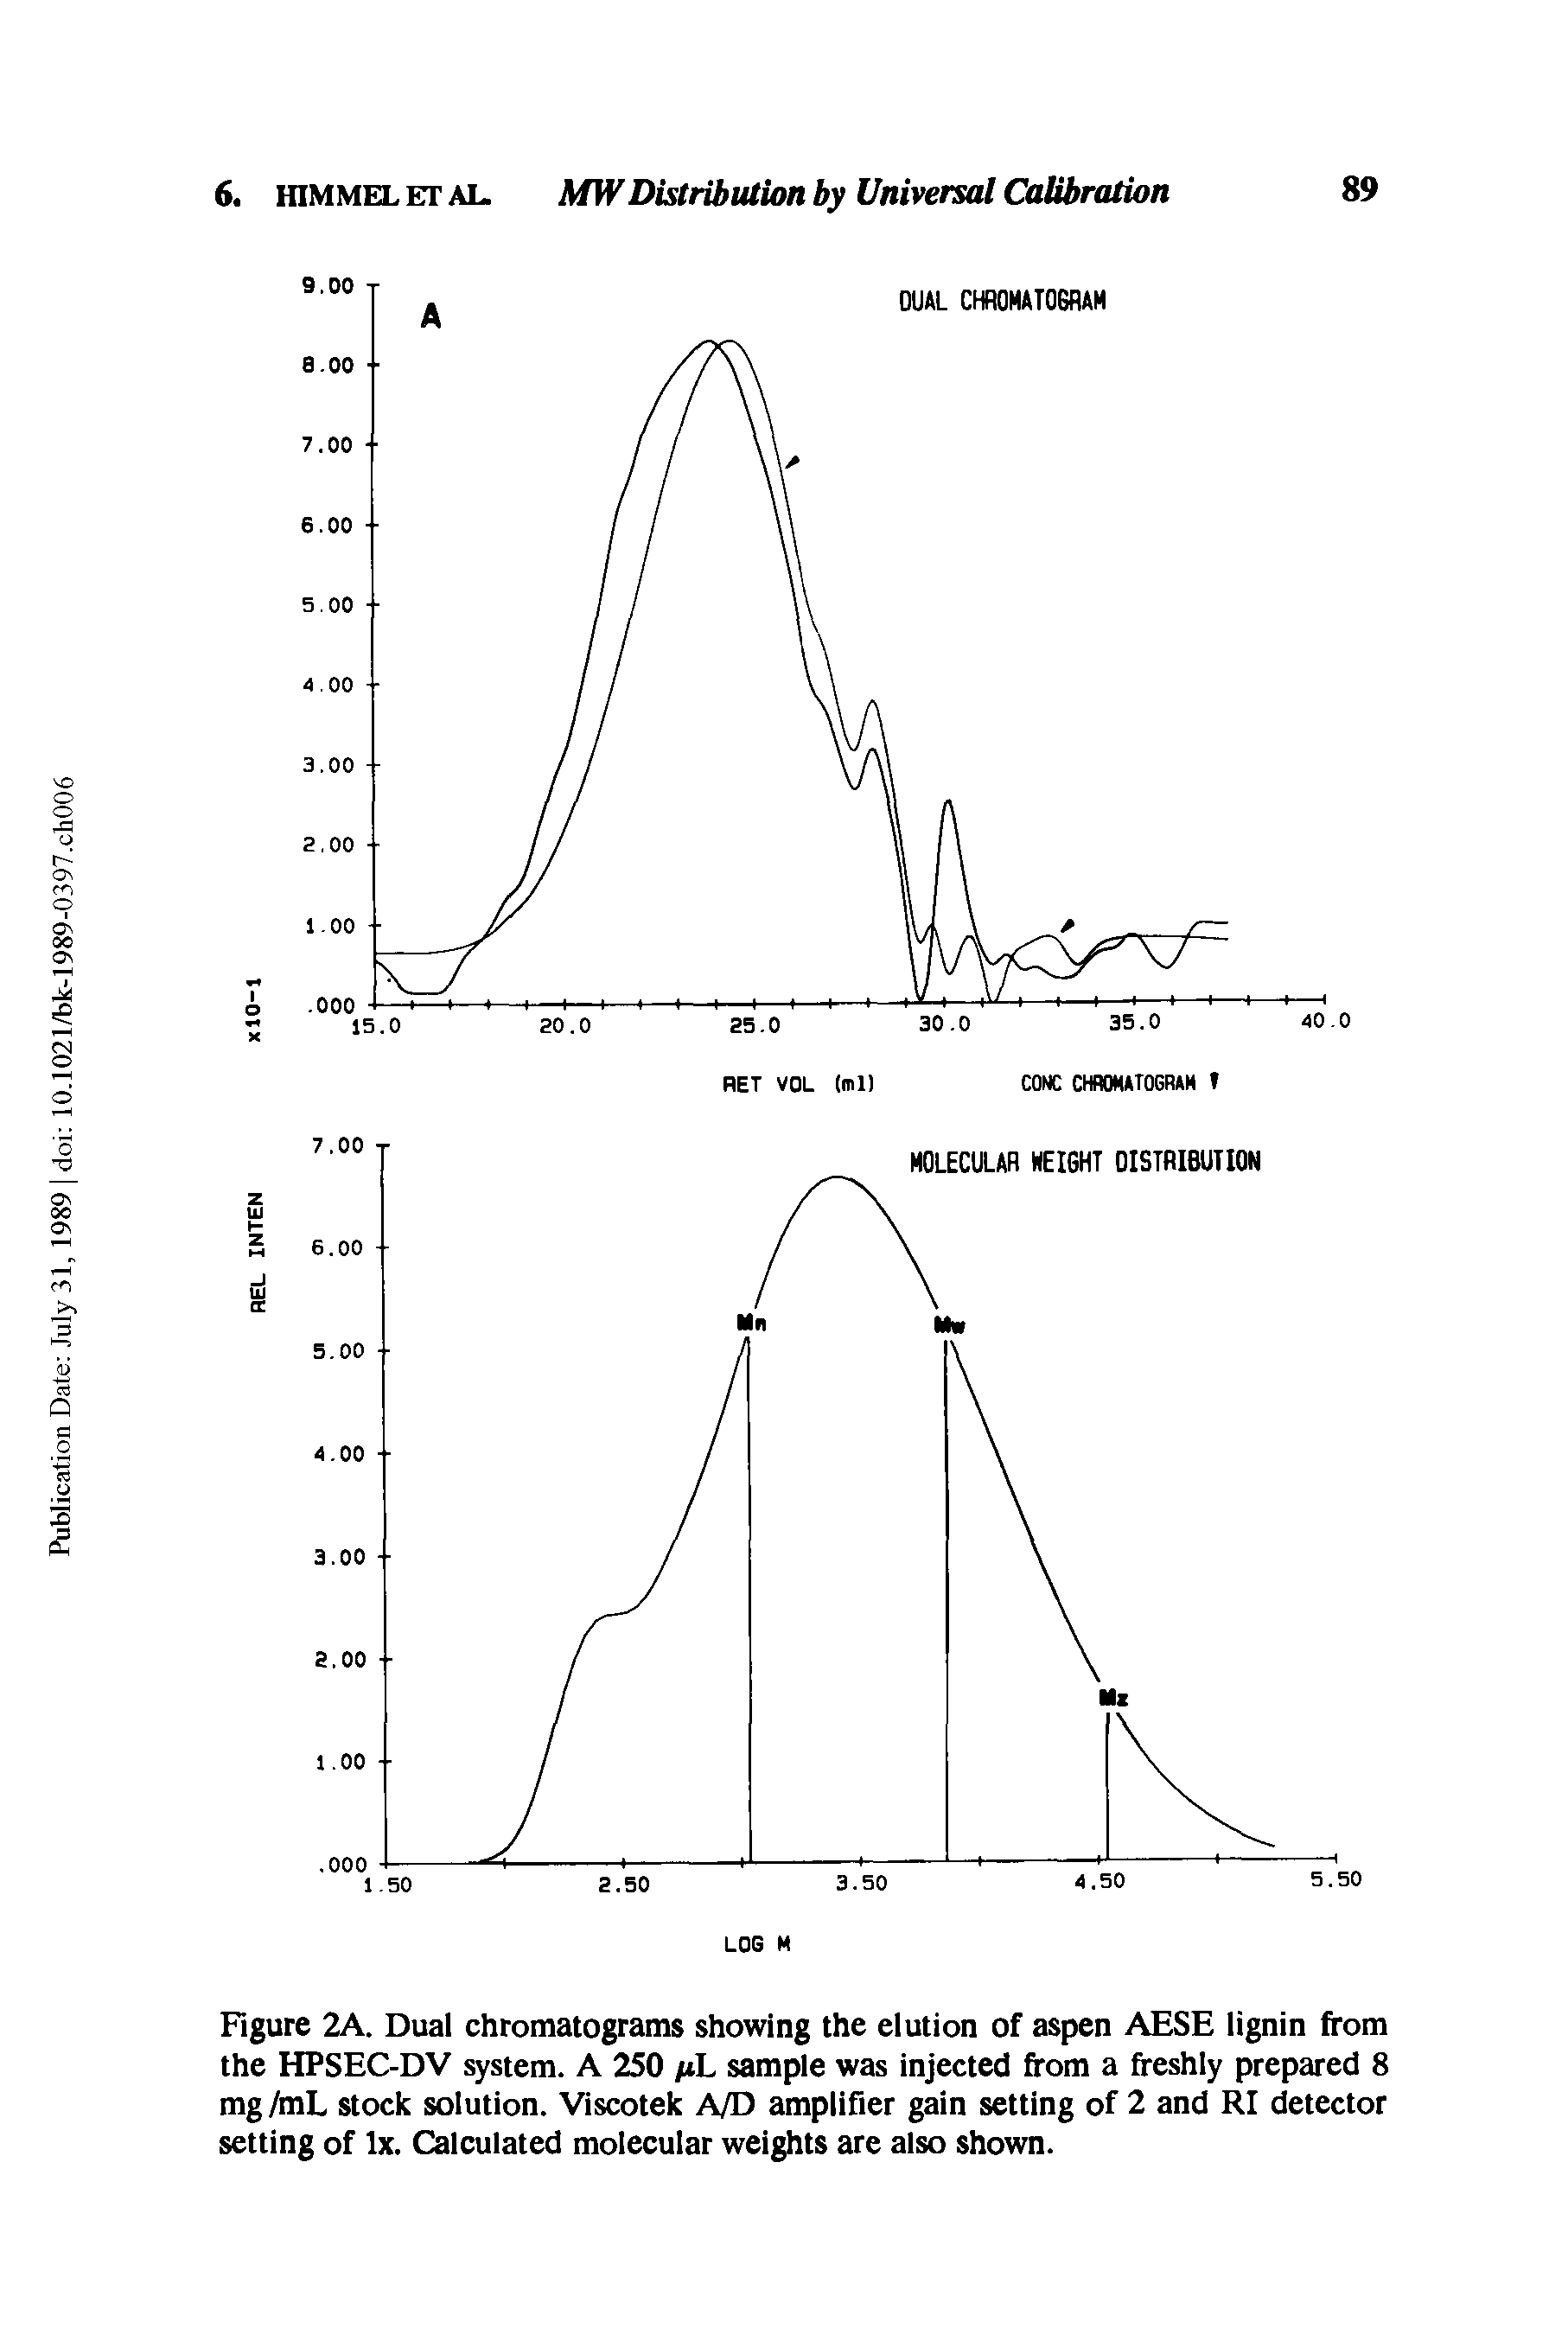 Figure 2A. Dual chromatograms showing the elution of aspen AESE lignin from the HPSEC-DV system. A 250 fiL sample was injected from a freshly prepared 8 mg /mL stock solution. Viscotek A/D amplifier gain setting of 2 and RI detector setting of lx. Calculated molecular weights are also shown.